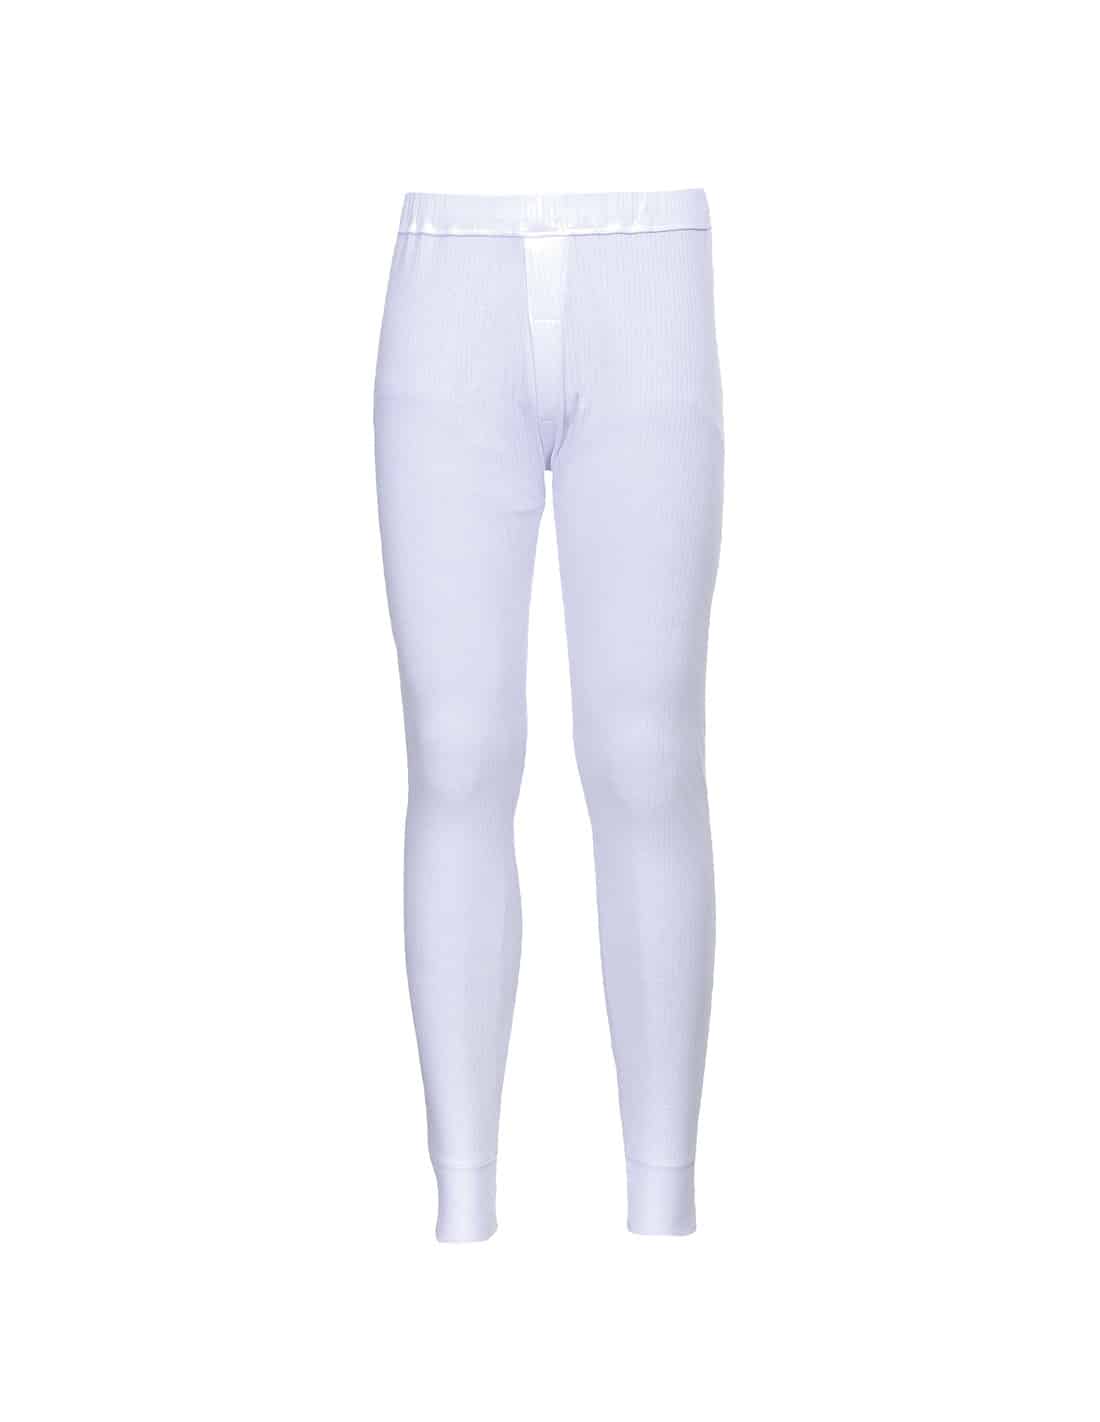 Legging thermique - Ultra Chaud - Blanc - Homme